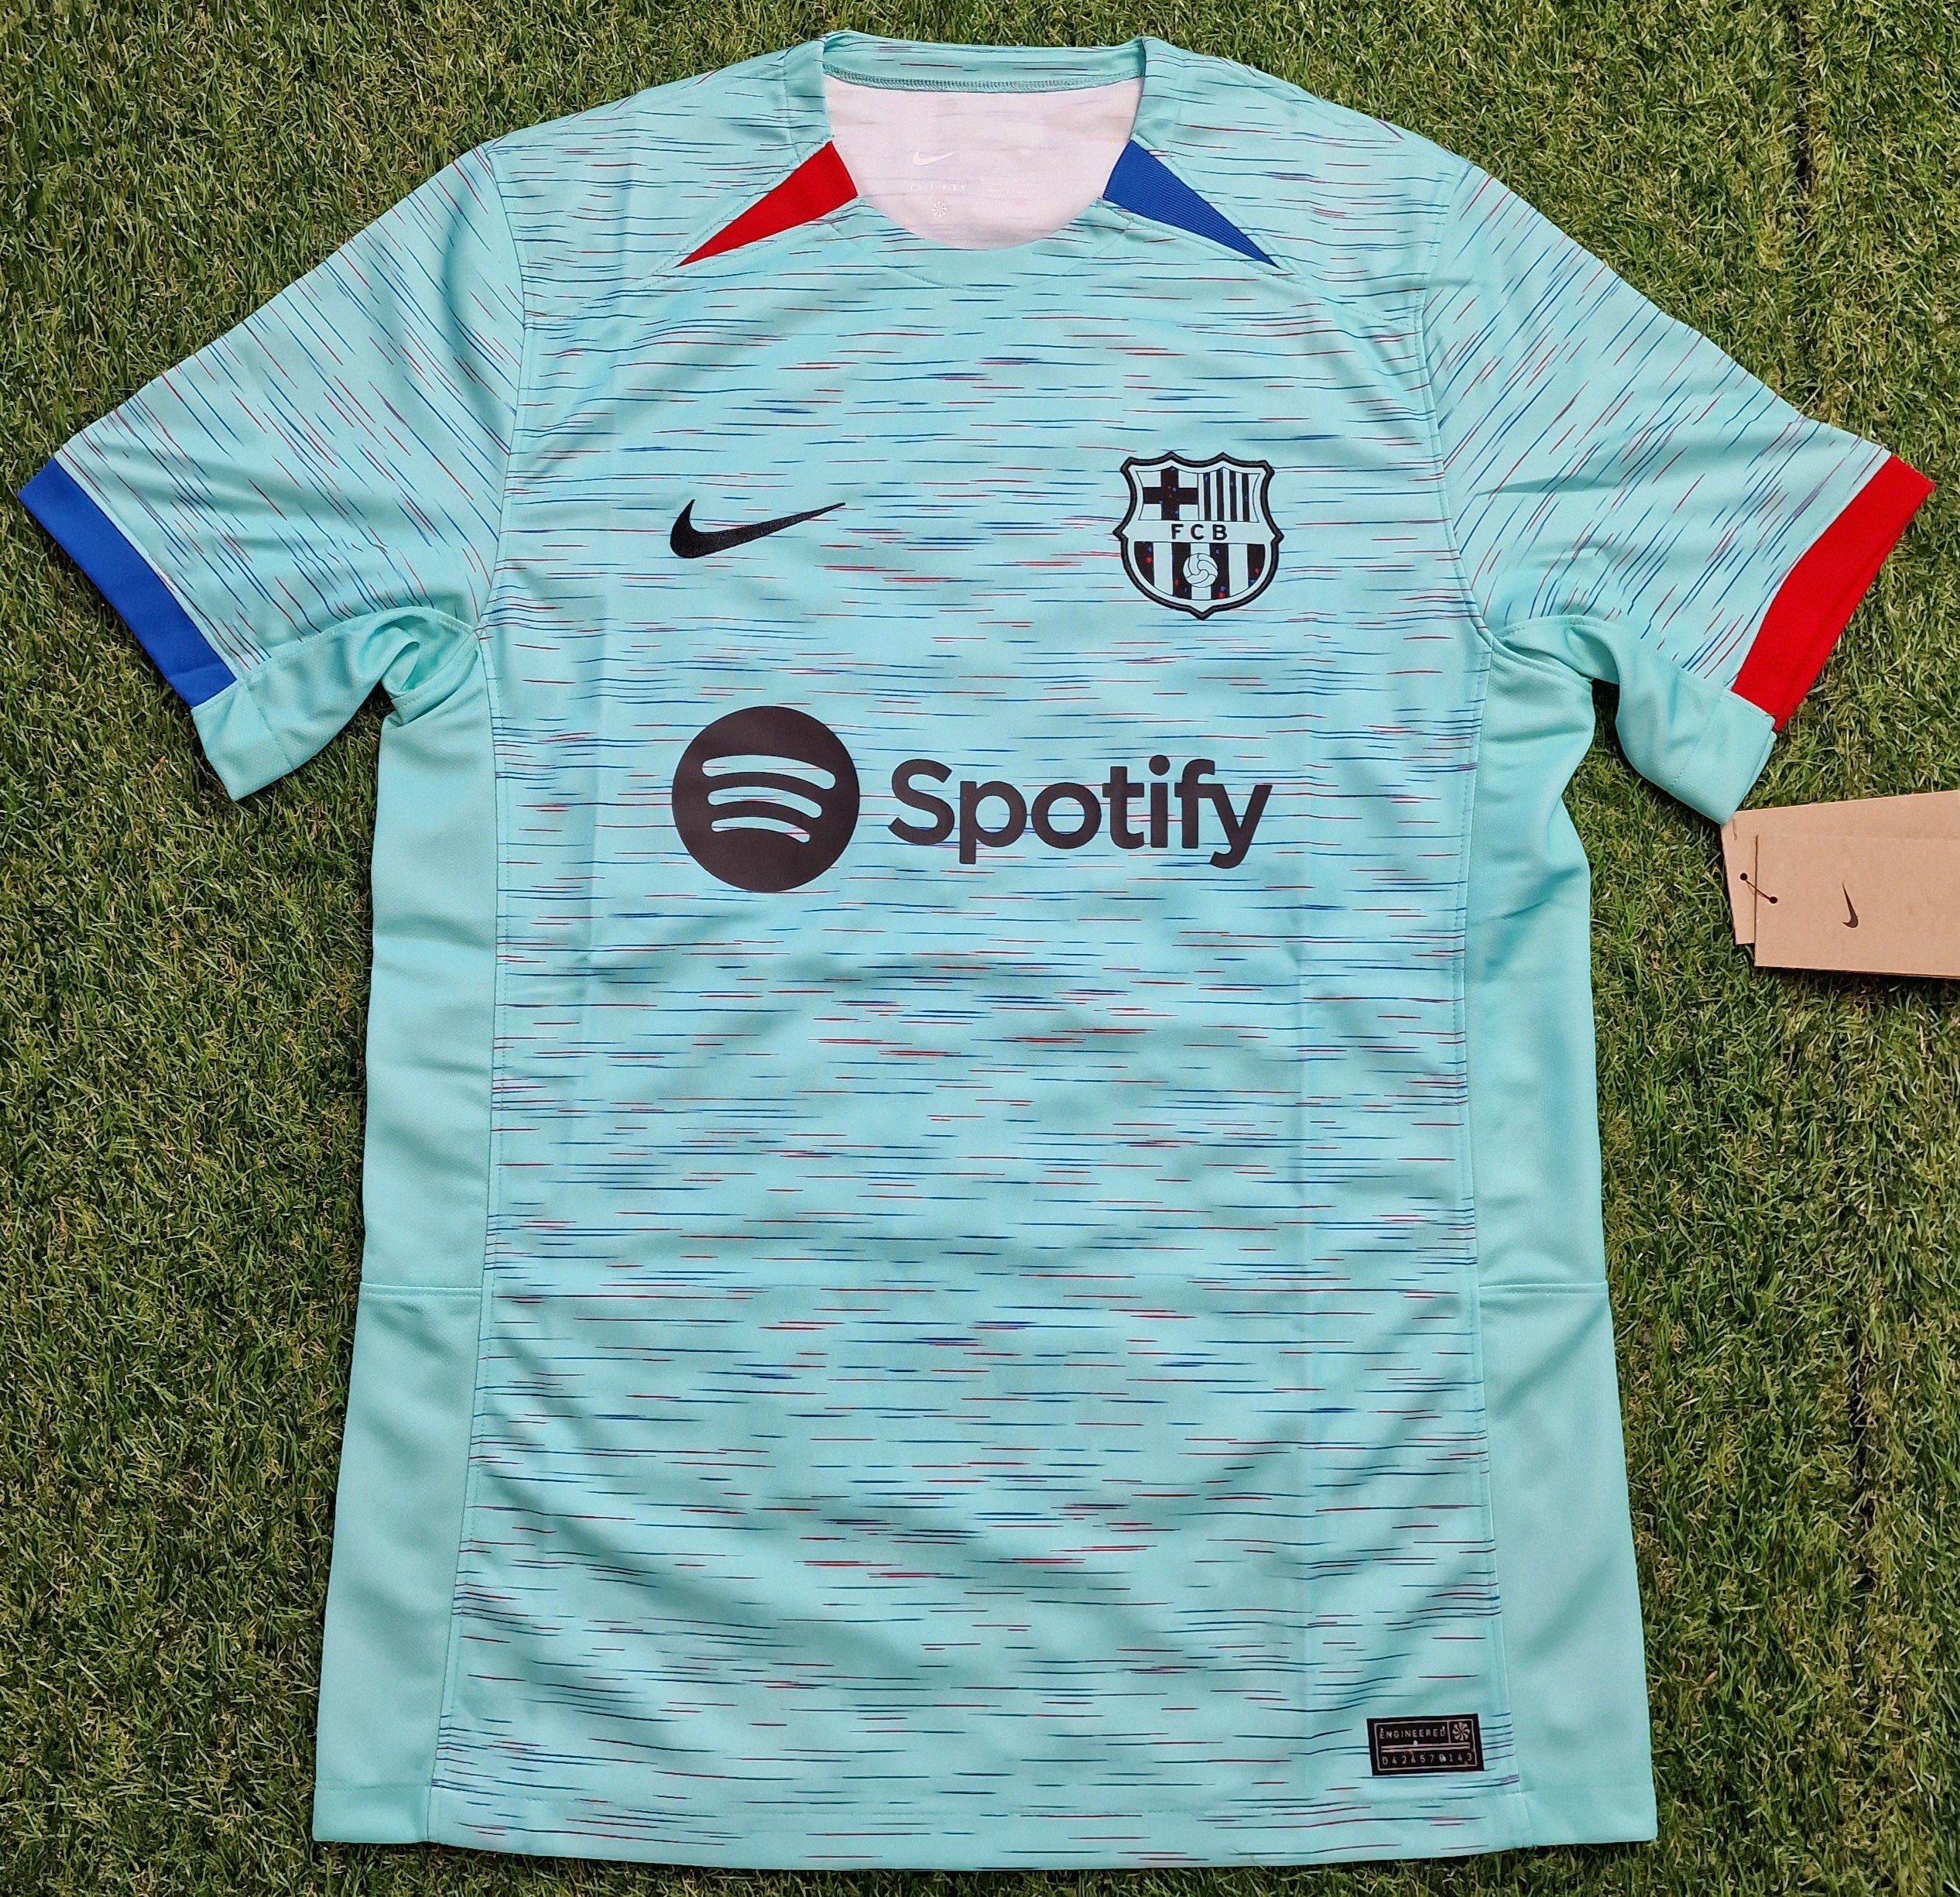 Aqua F.C. Barcelona Nike Third Shirt 23/24, made from 100% recycled polyester with a new pattern designed for sustainability, featuring iconic club crest and sponsor logos.